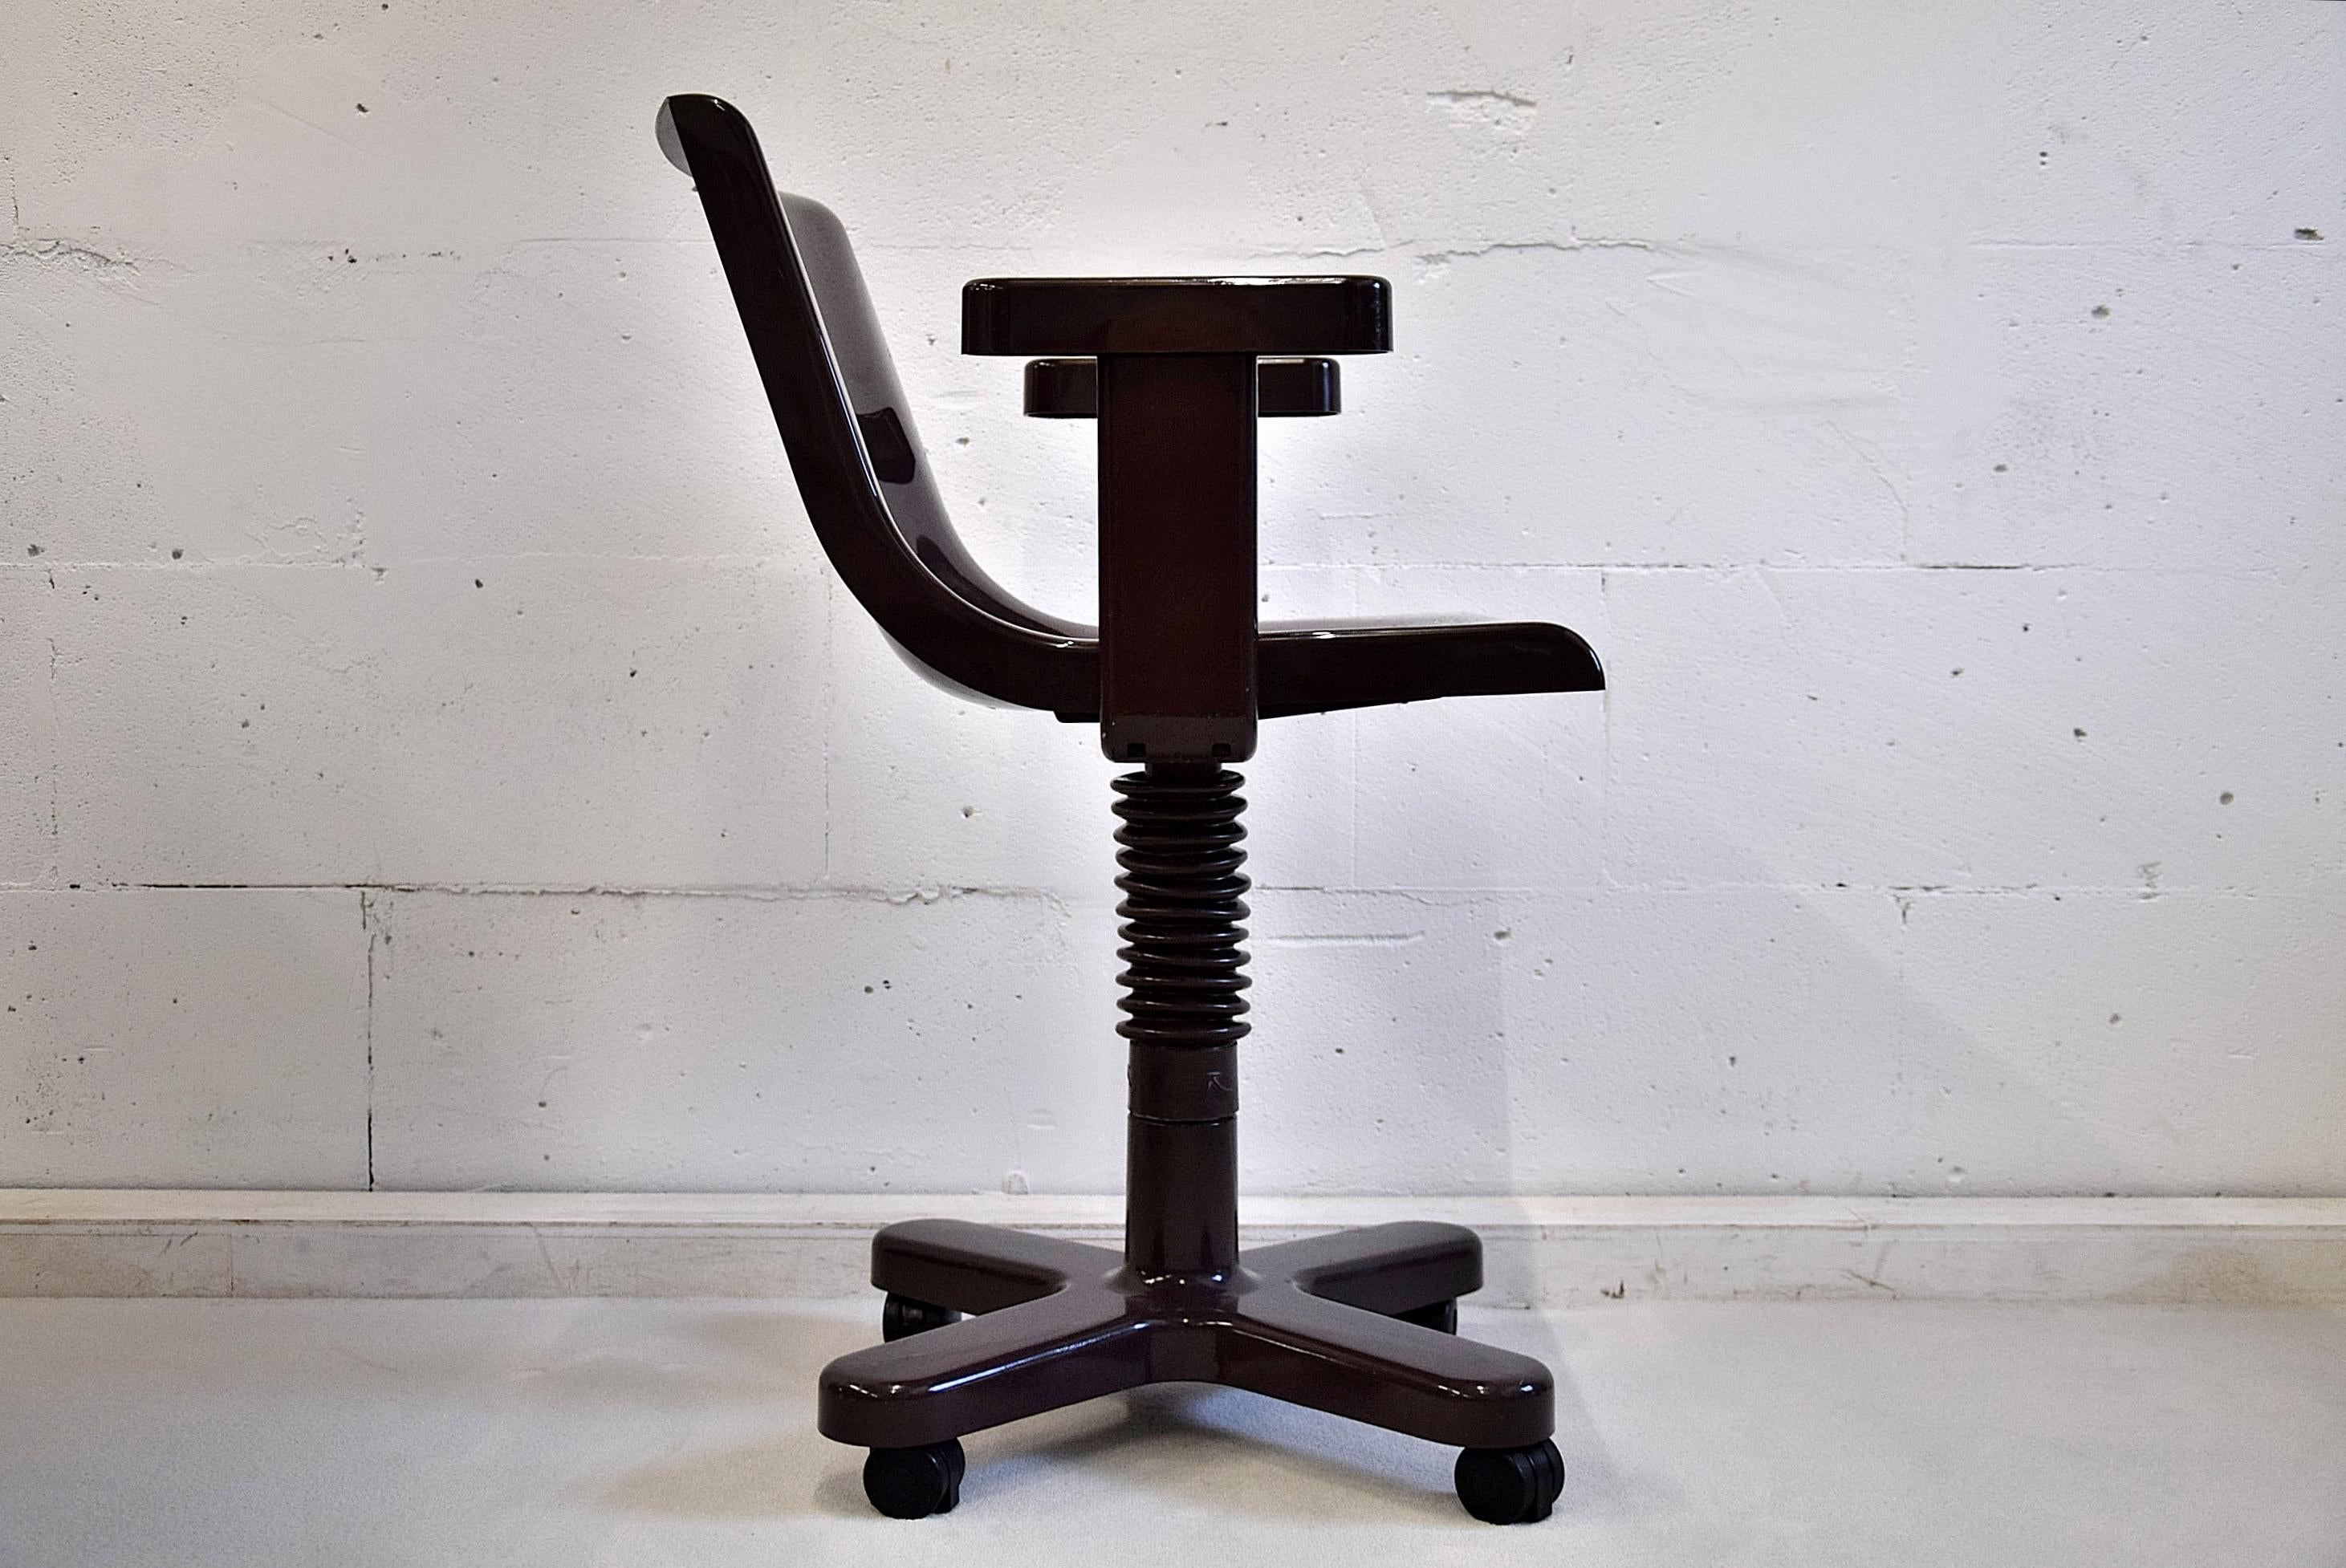 Italian Ettore Sottsass Brown Synthesis Desk Chair for Olivetti, Italy, 1973